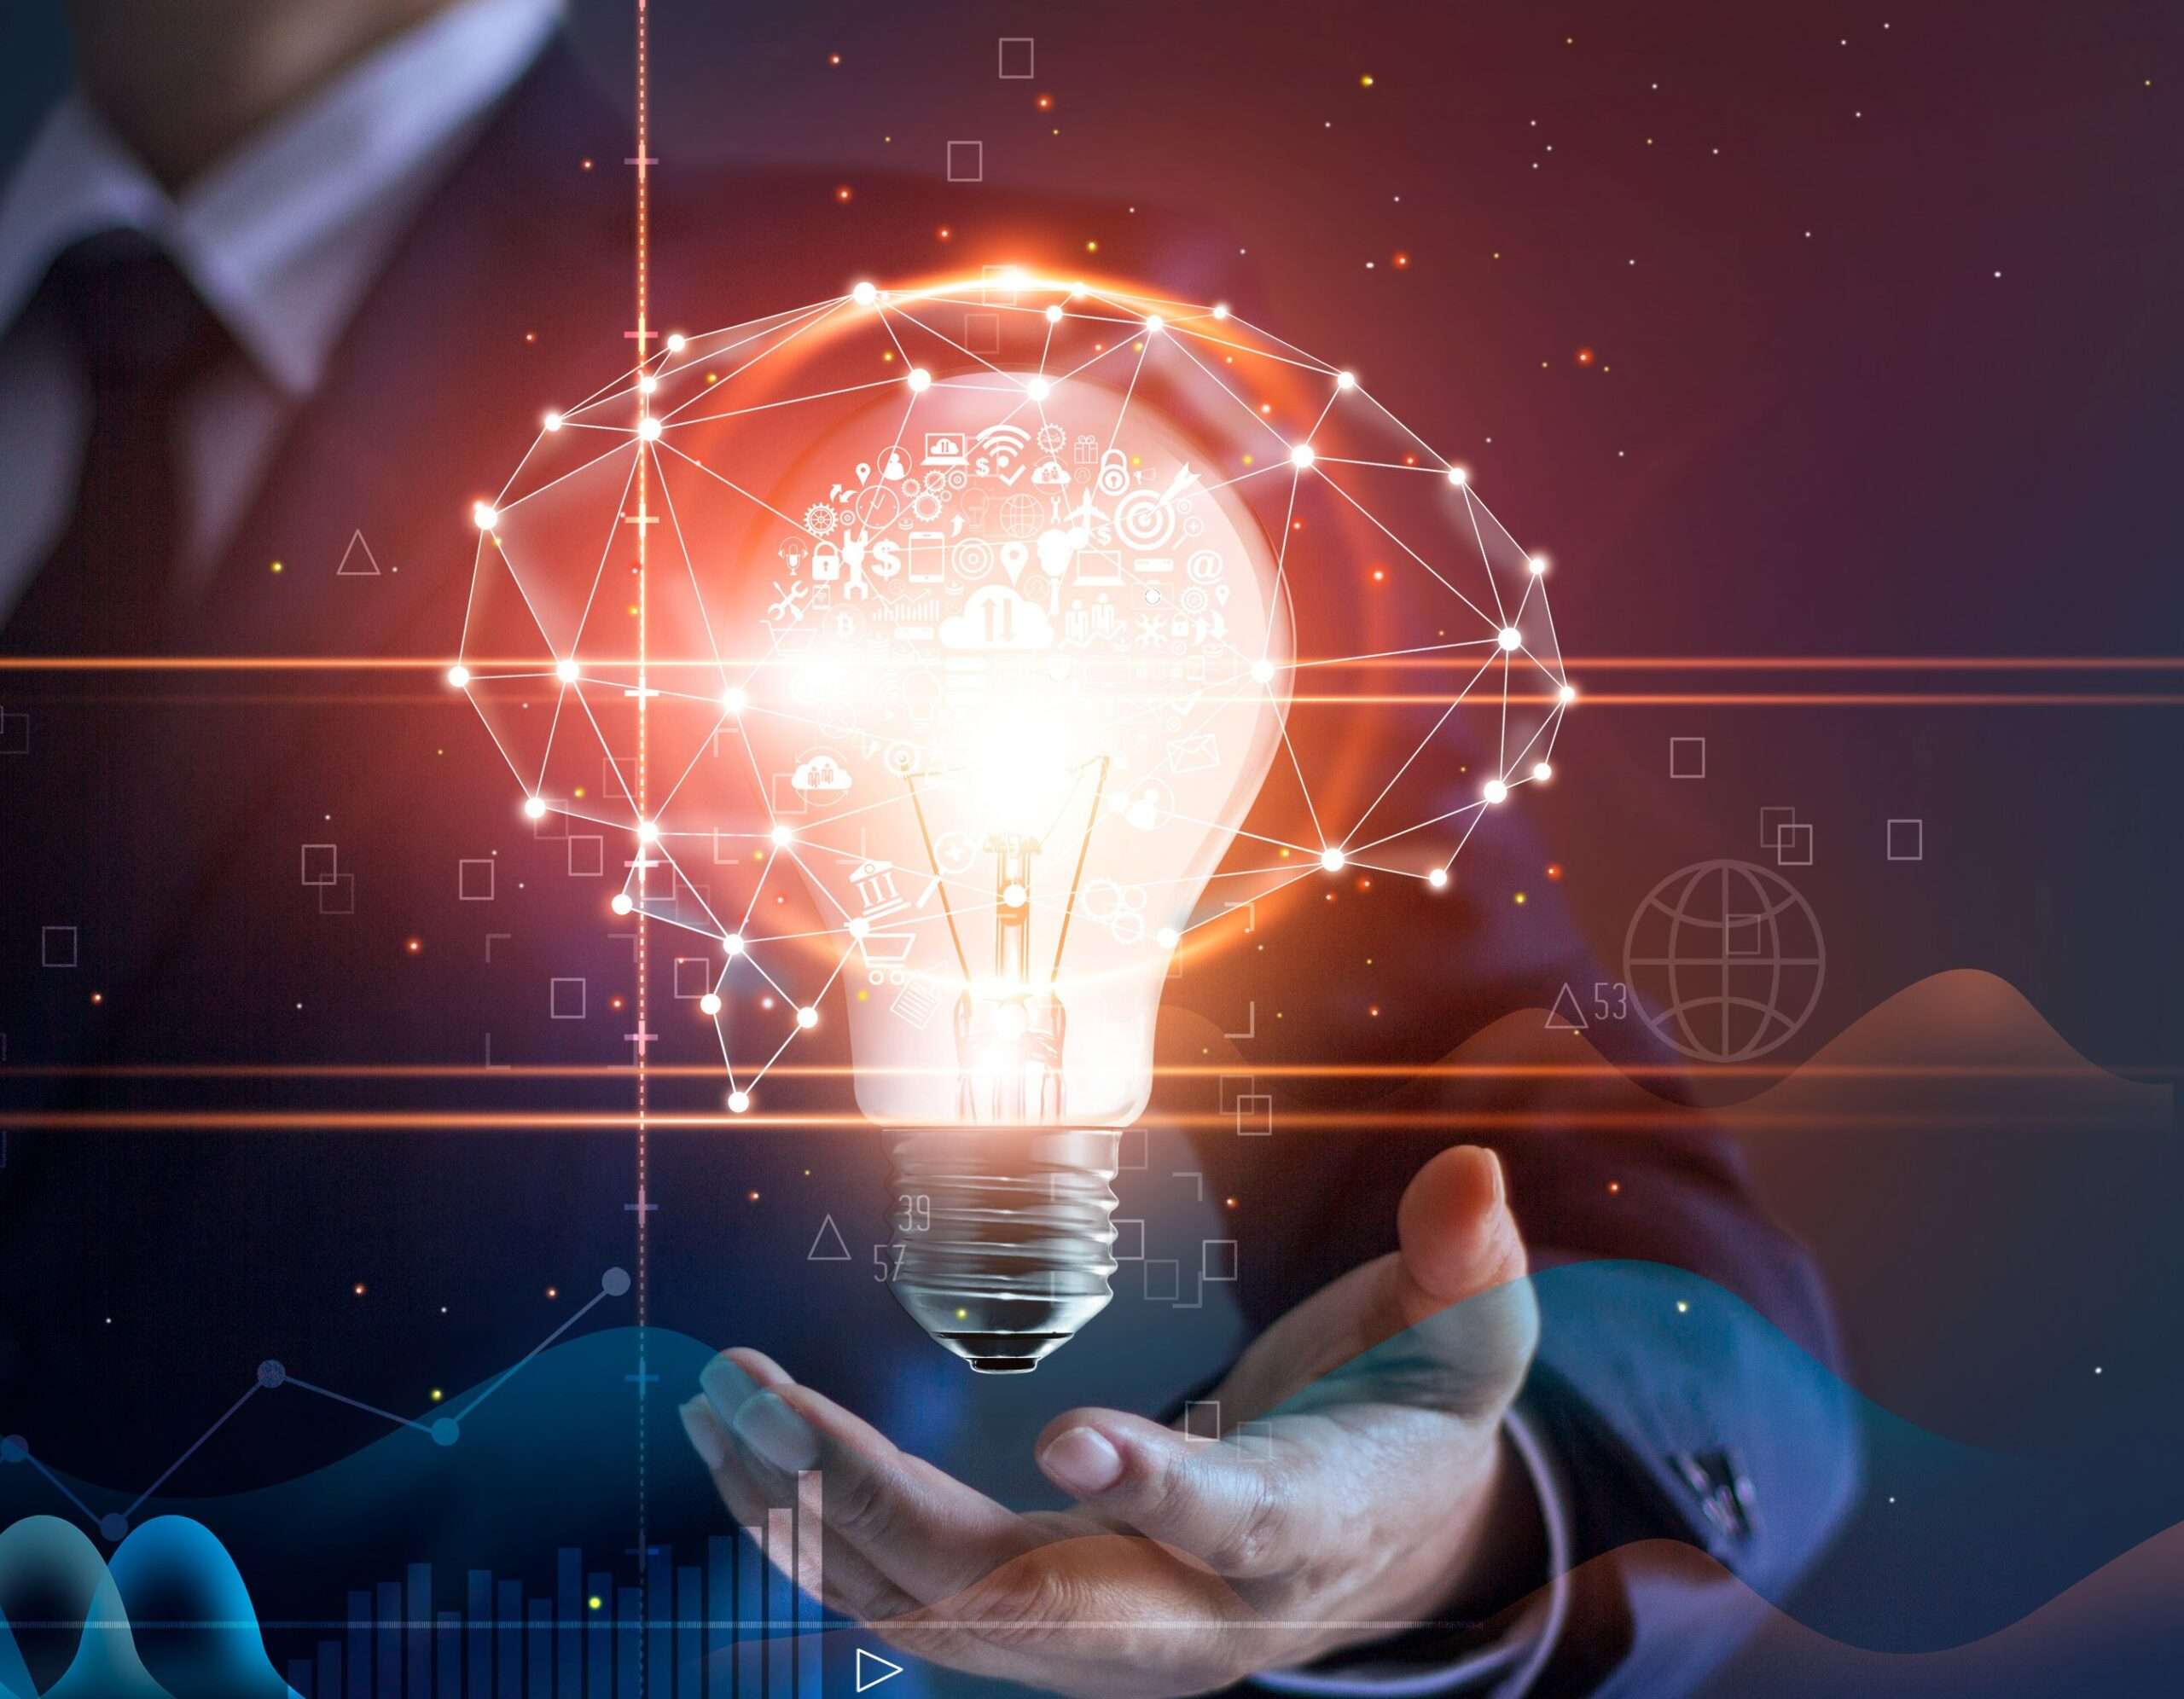 Businessman Holding Light Bulb And Brain Network With Icon Business And Technology, Innovative In Futuristic, Network Connection On Virtual Interface Background, Abstract, Innovation And Business Technologies Concept.